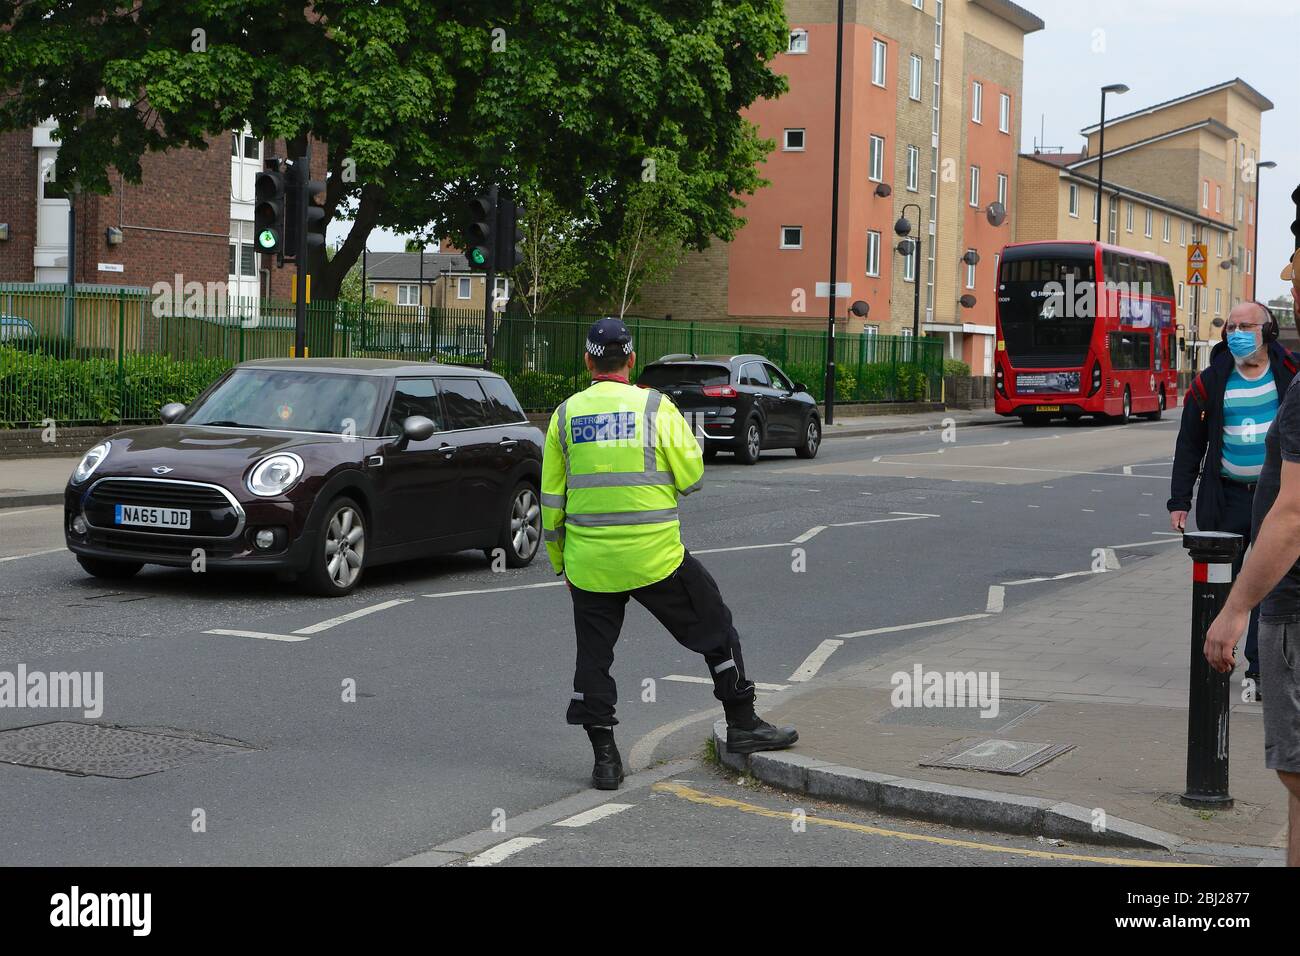 Traffic Police in London enforcing speeding restrictions in a 20 mph zone. Since same period last year there has been a 230% increase in speeding. Stock Photo